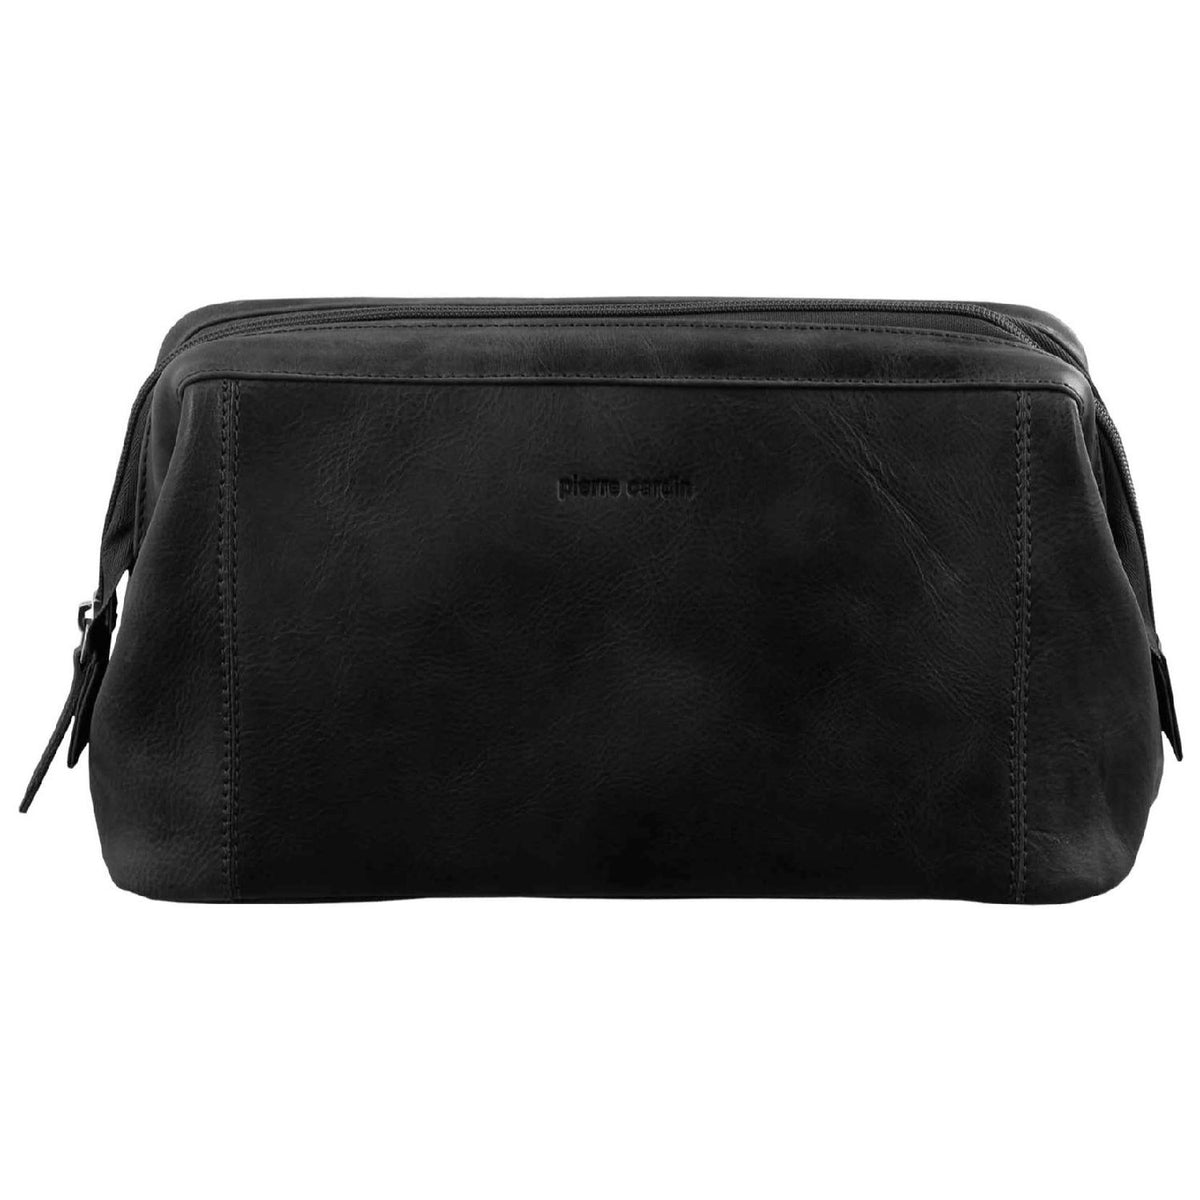 Front of Black Pierre Cardin Rustic Leather Toiletry Bag